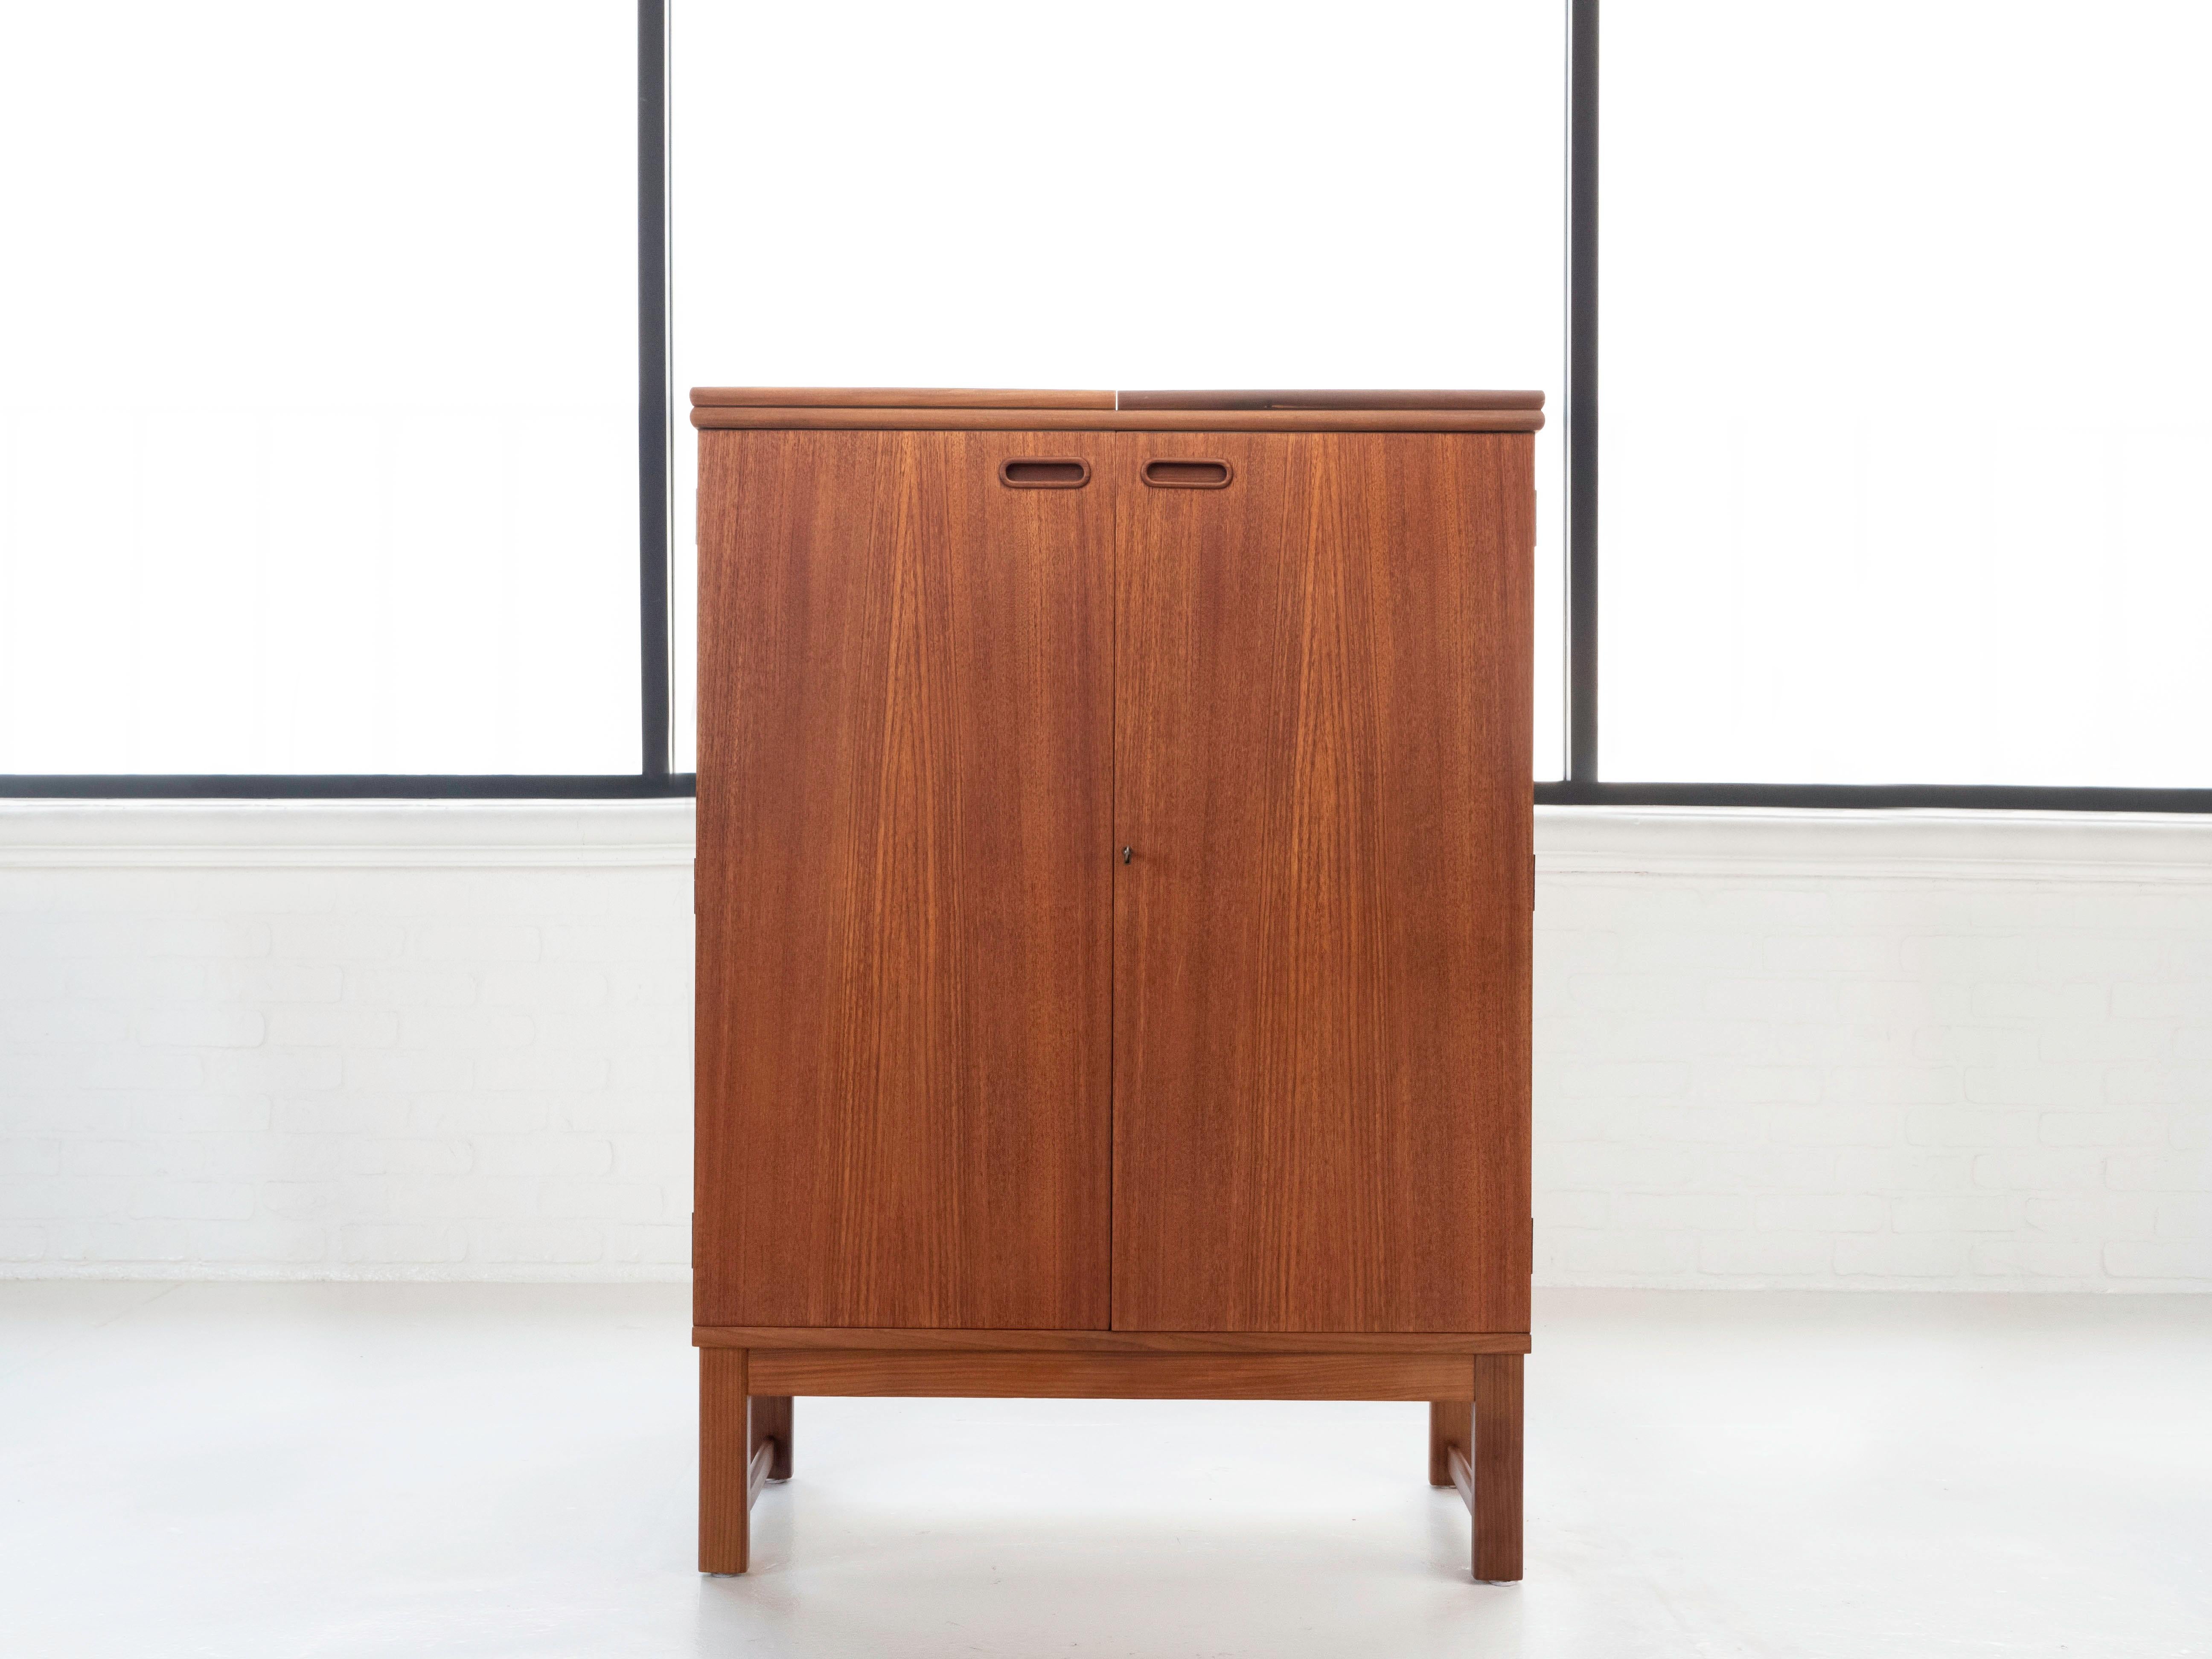 Teak mid-century dry bar cabinet by maker Turnbridge of London.  Circa 1960's.  The cabinet has a two-door front that opens to a bar shelf with a mirrored back.  There is a flip top.  When the top is flipped, there is a faux teak laminate that you